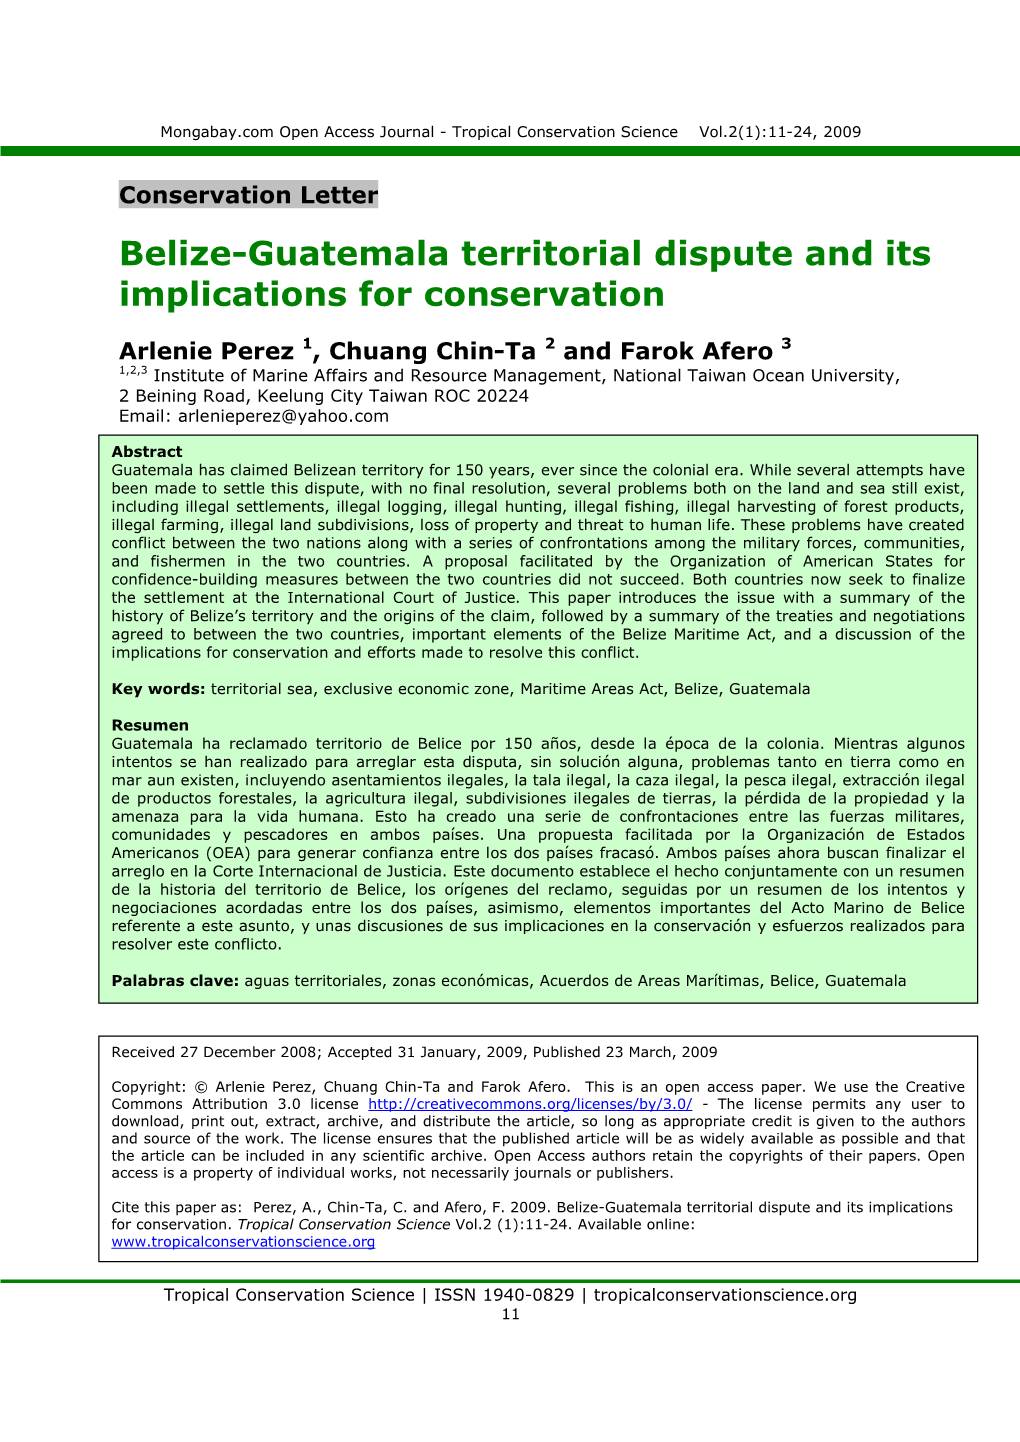 Belize-Guatemala Territorial Dispute and Its Implications for Conservation